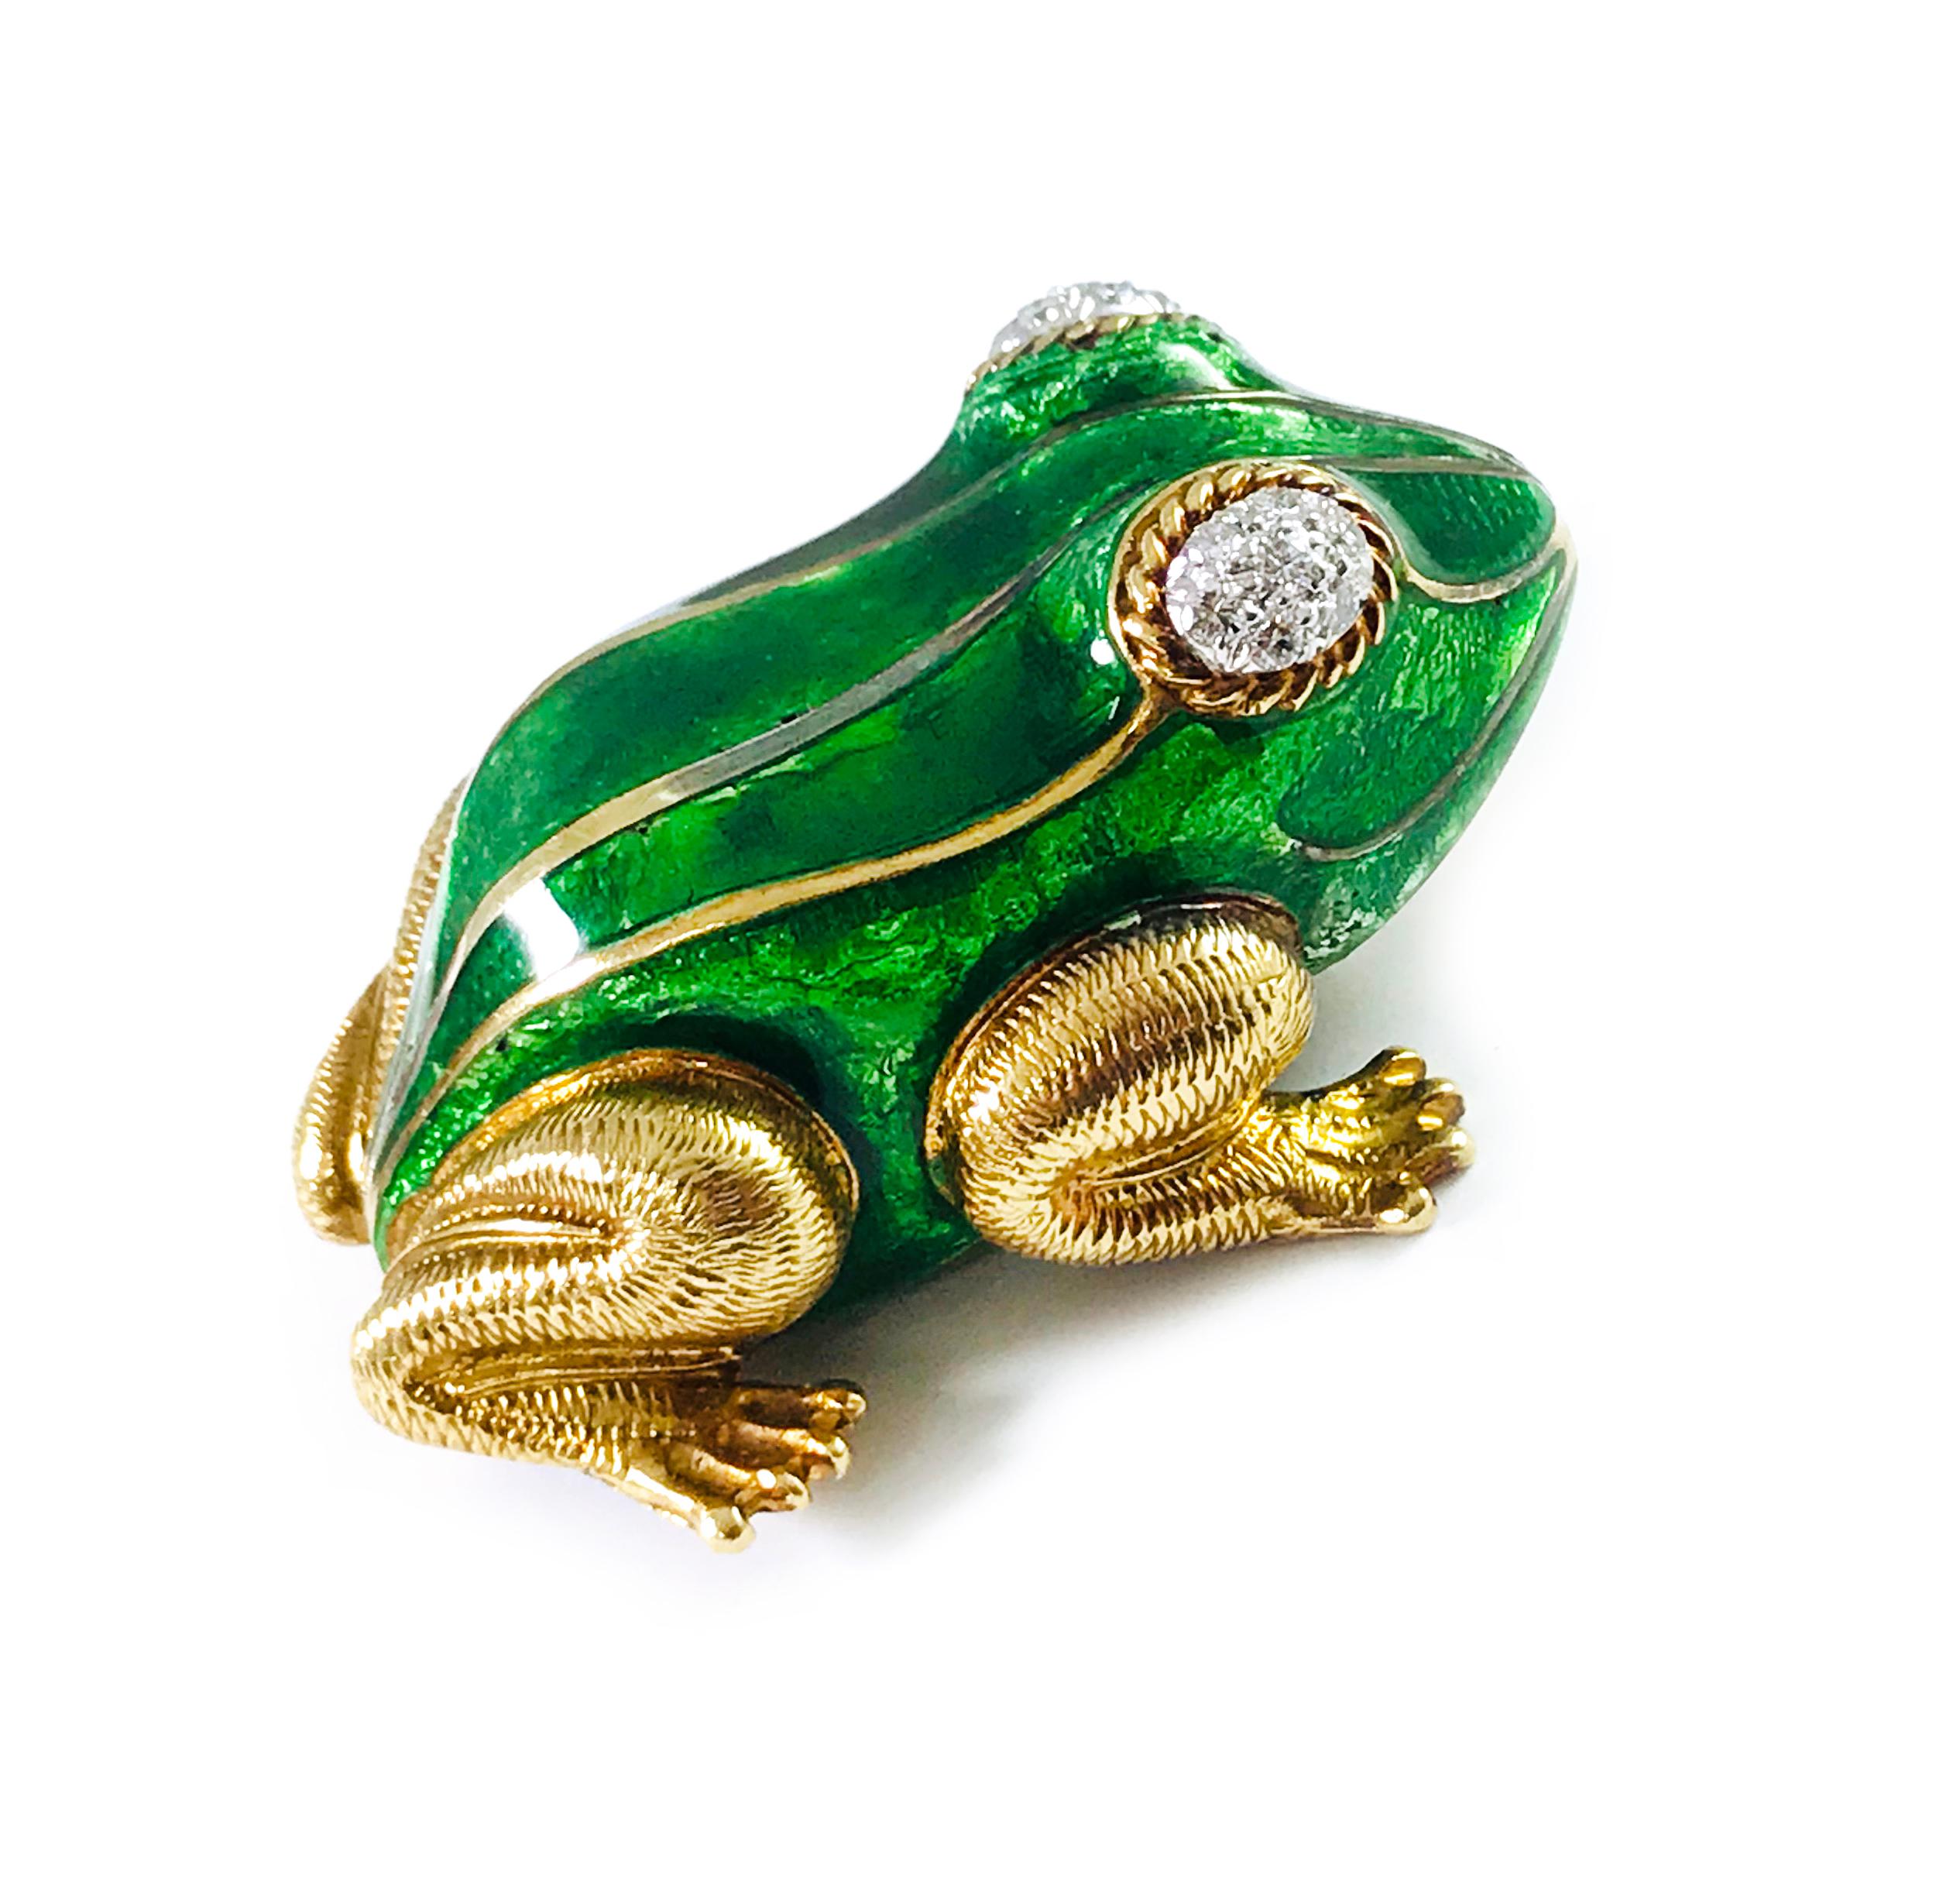 Diamond 18k Enamel Frog Brooch. This adorable frog is looking for his princess, one look at those sparkly eyes and you'll be enchanted. Beautiful textured detail on the legs, twisted rope around the eyes and gorgeous bright green enamel body. The